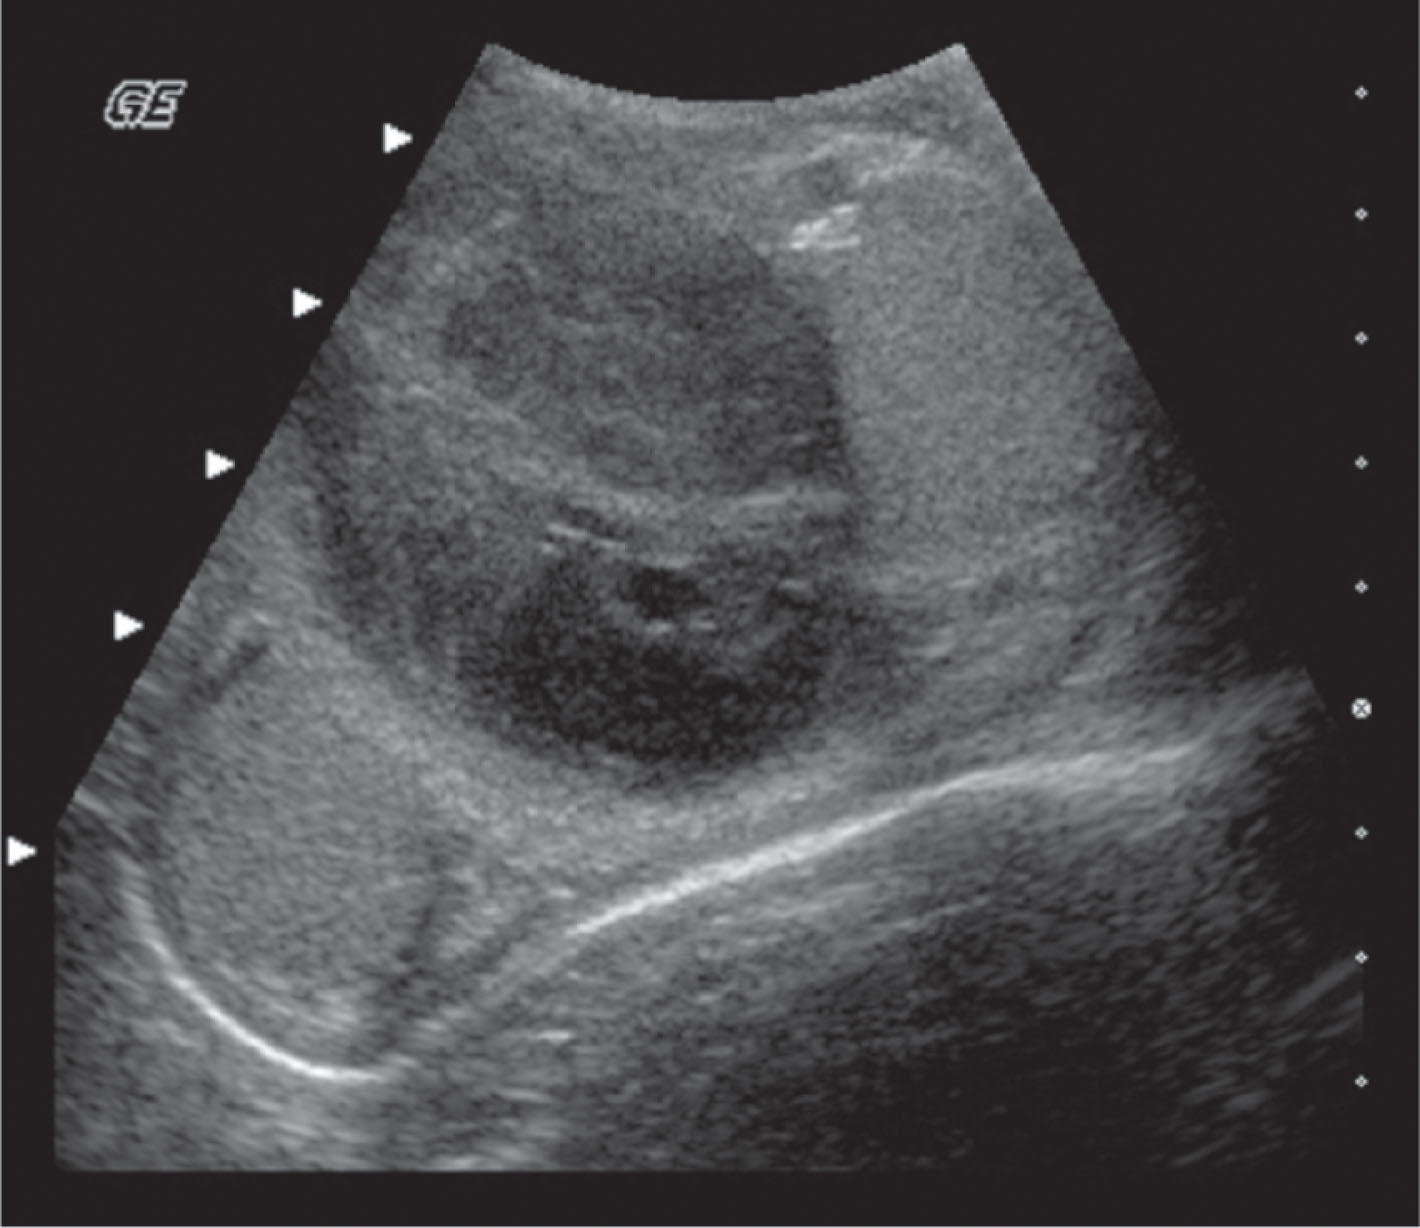 Fig. 23.14, Complex hematoma in a patient with hemophilia following scrotal trauma. Transverse ultrasound scan of both testes shows a large heterogeneous mass adjacent to the left testis. Color Doppler (not shown) demonstrated the mass to be avascular.